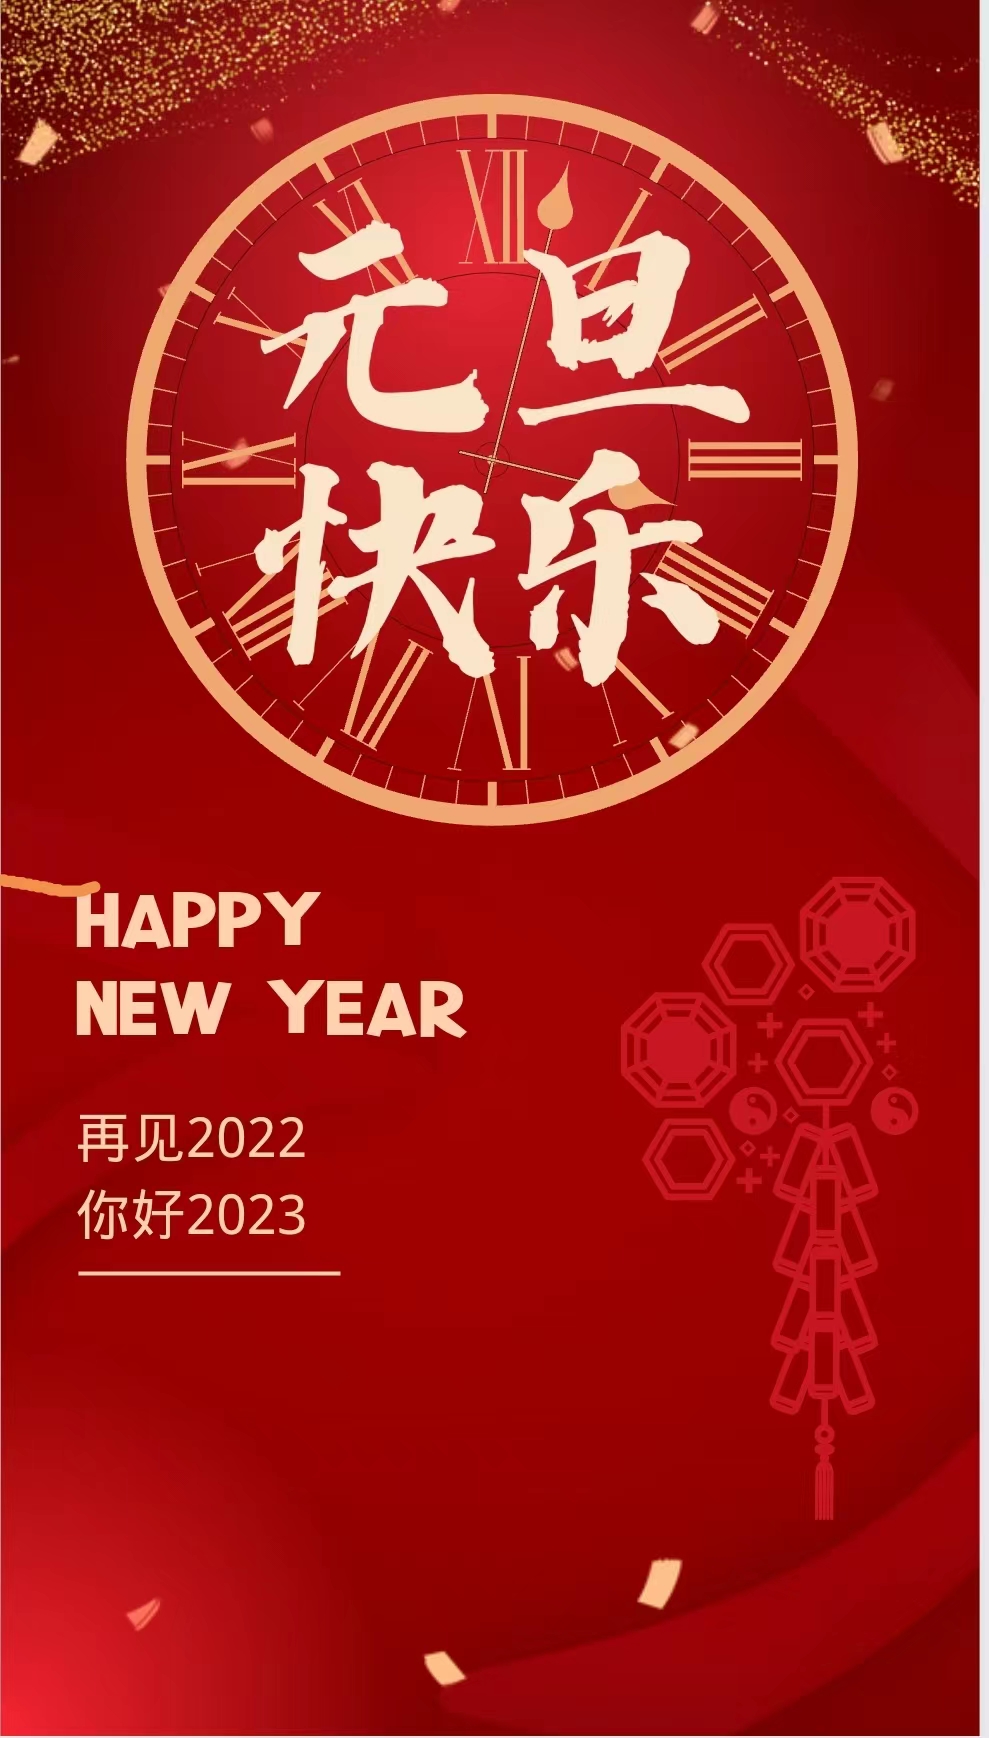 <i style='font-style:normal;color:#f00f00'>HAPPY NEW YEAR!</i>